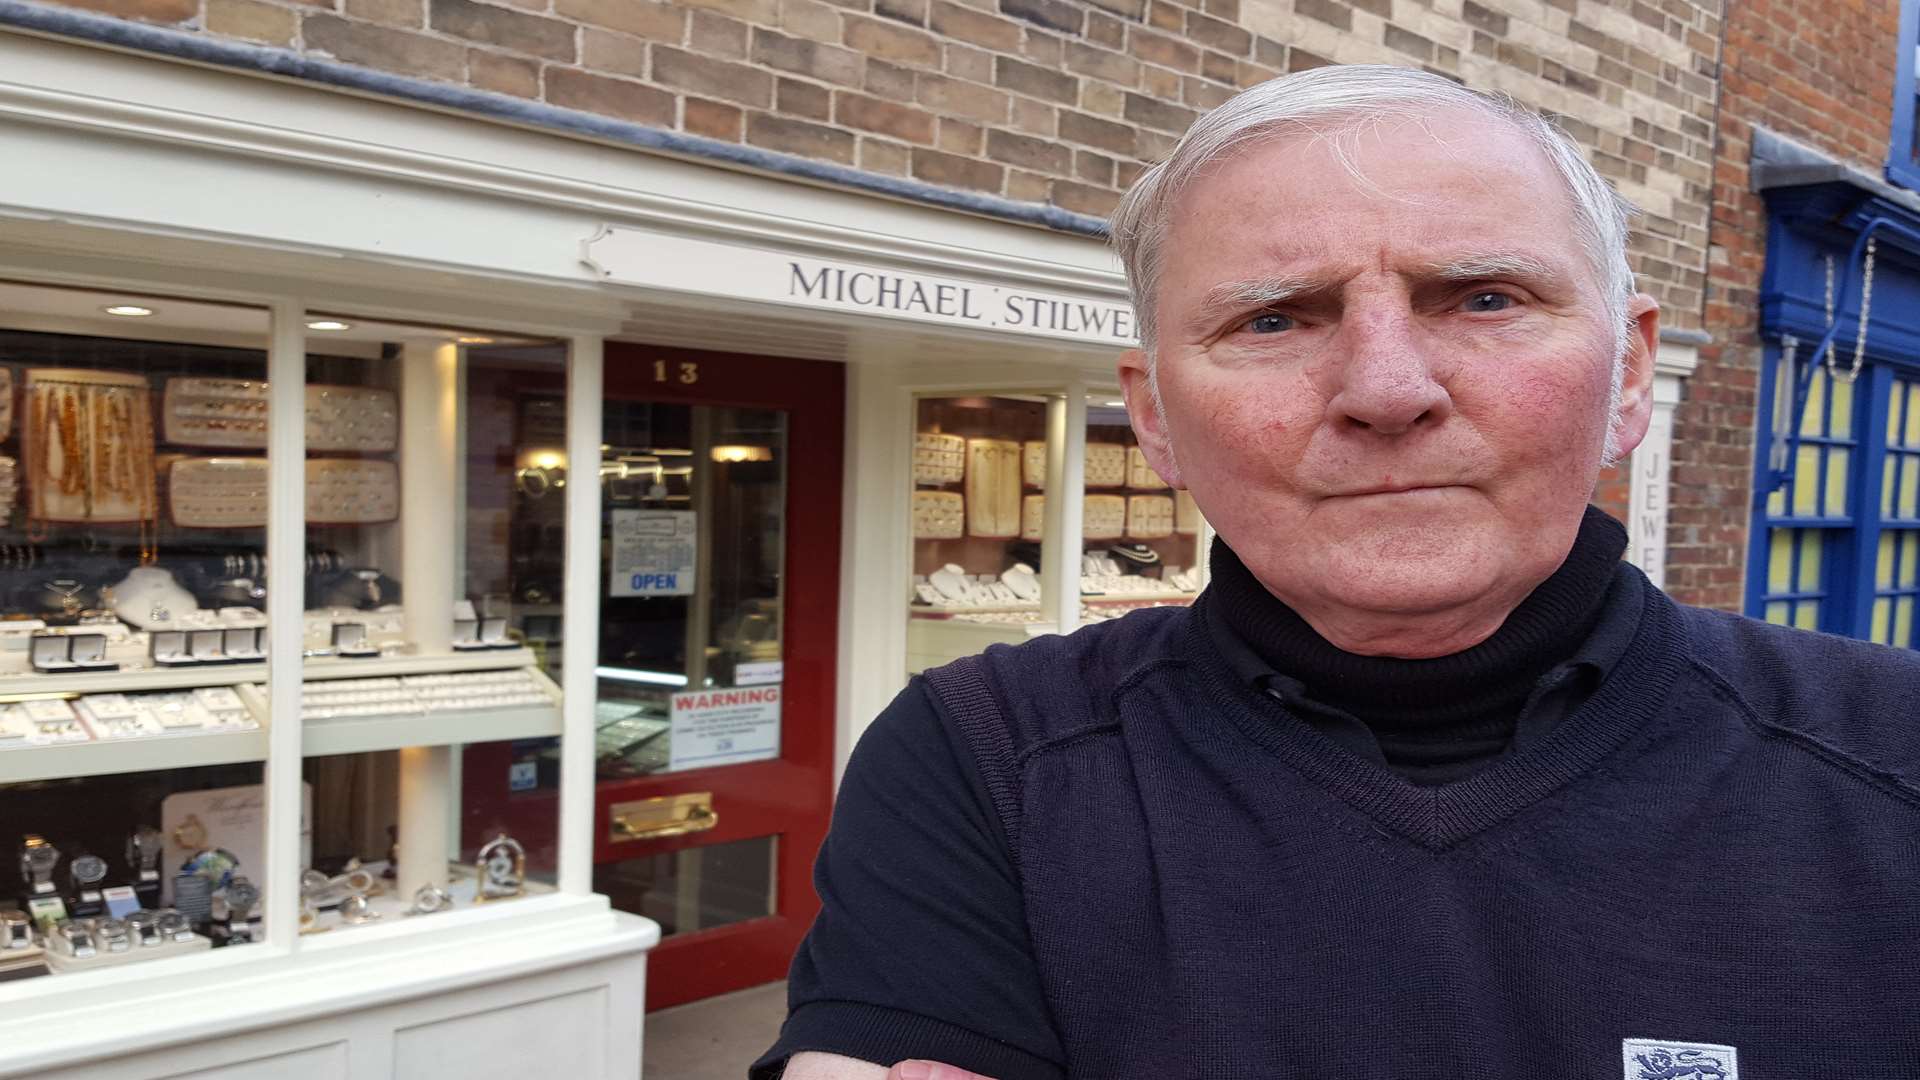 Have-a-go pensioner David McLanaghan who grappled with a robber